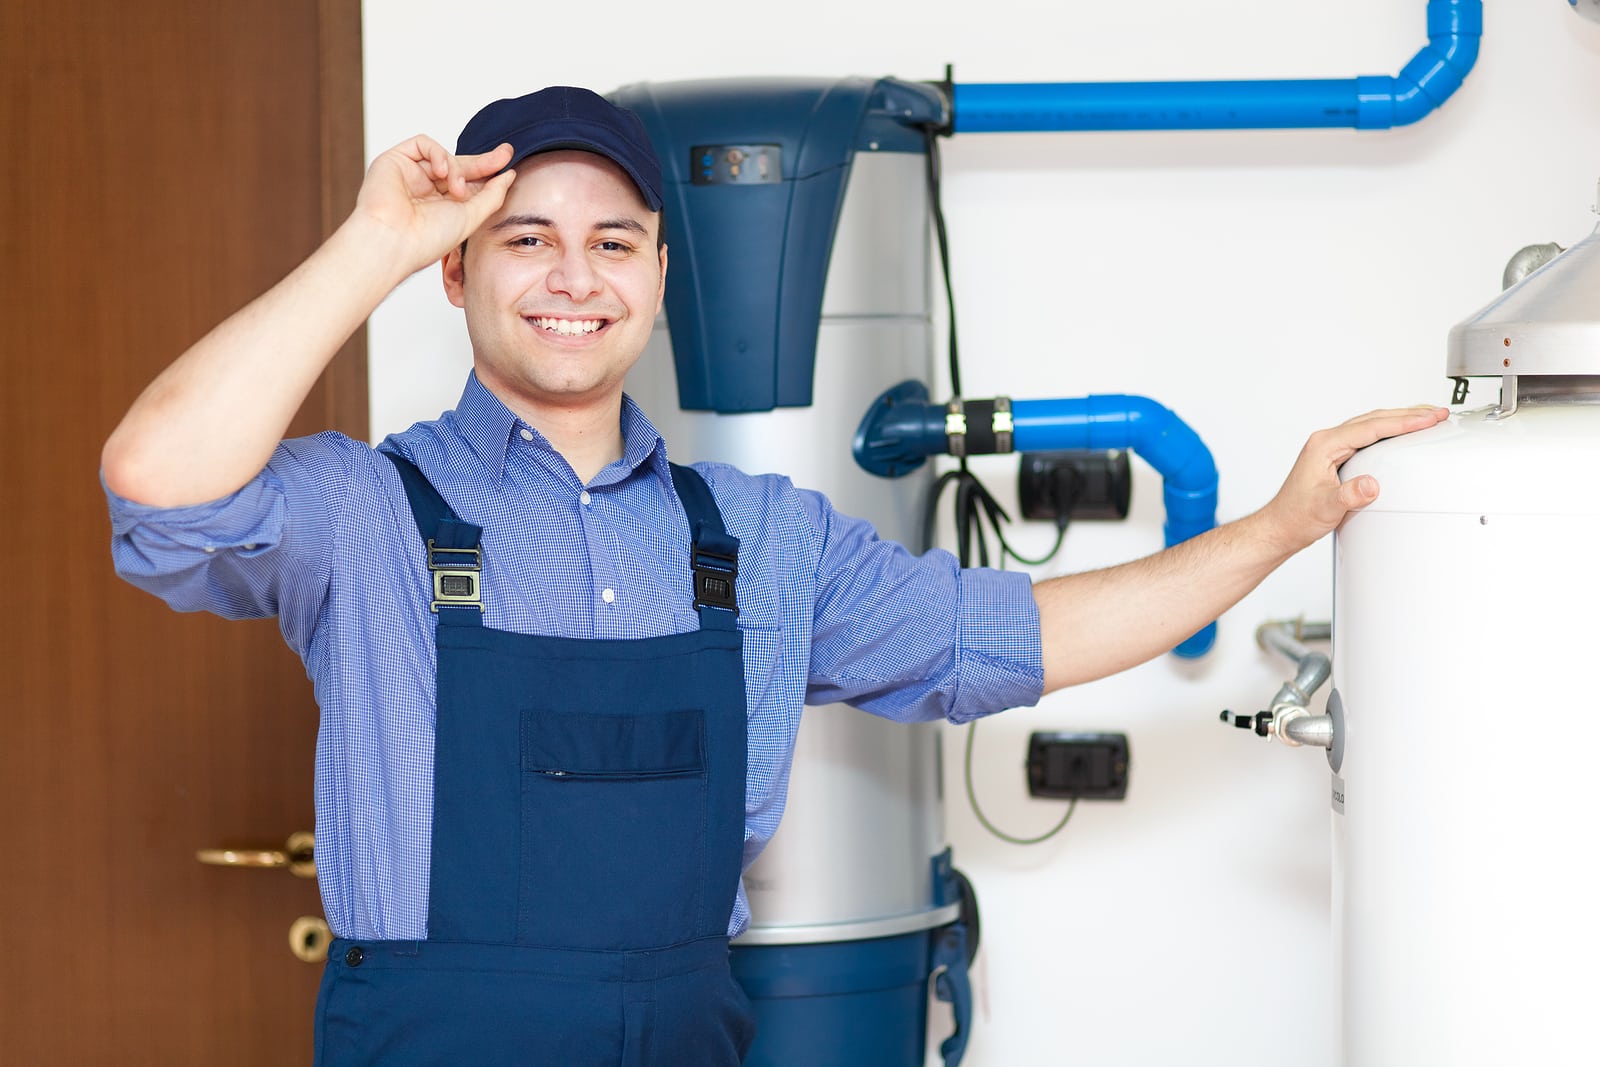 Lukewarm to Boiling: The Elements That Power Your Water Heater